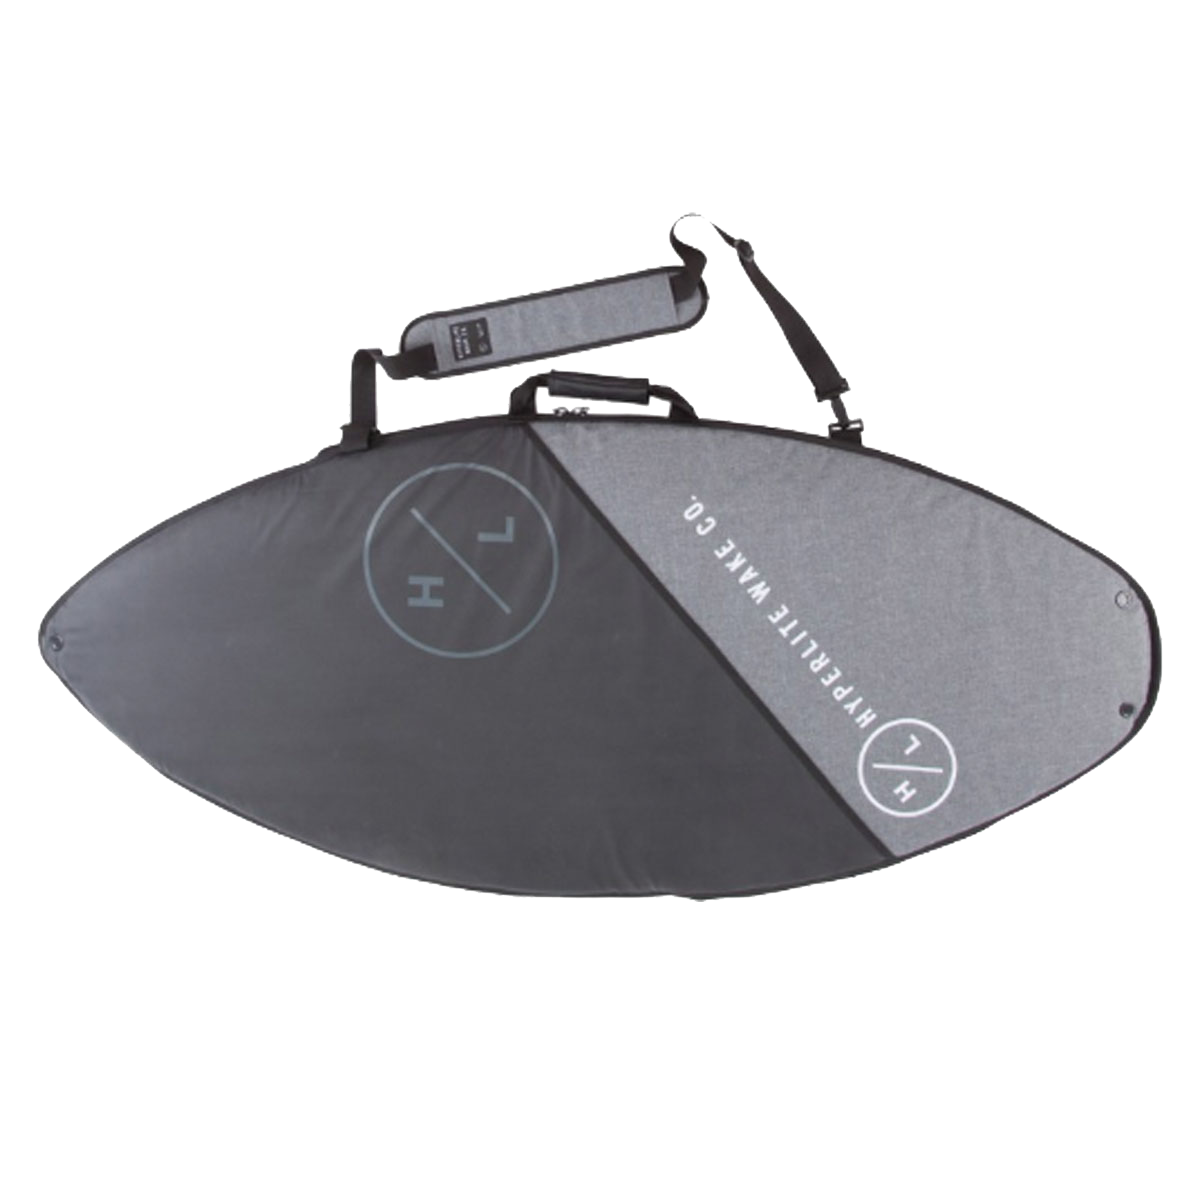 The Hyperlite Wakesurf Bag by Hyperlite is a surfboard bag equipped with inner and outer pockets for convenient storage. It also features a large storage area and a sturdy handle for easy transport.